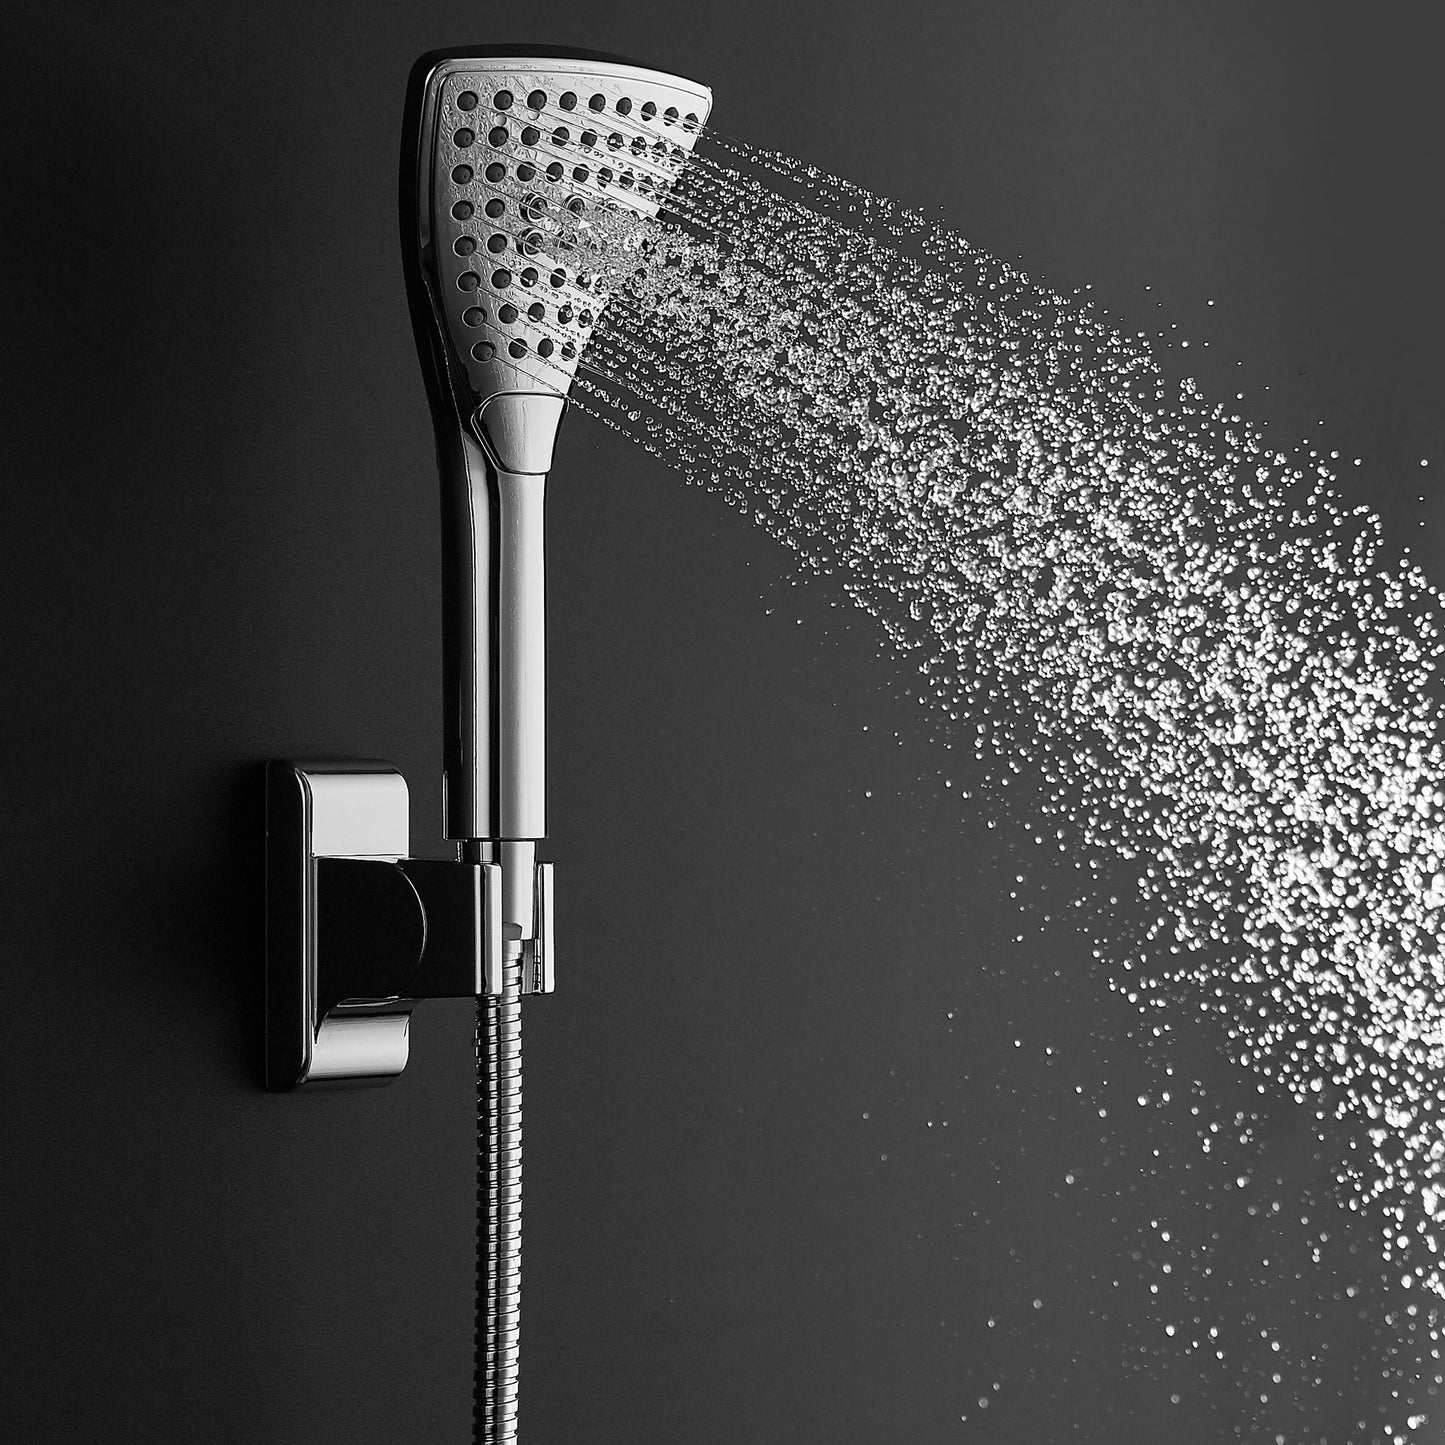 PULSE ShowerSpas PowerShot 3-Function Curved Shower Head 2.5 GPM in Chrome Finish Shower System With 3-Function Hand Shower